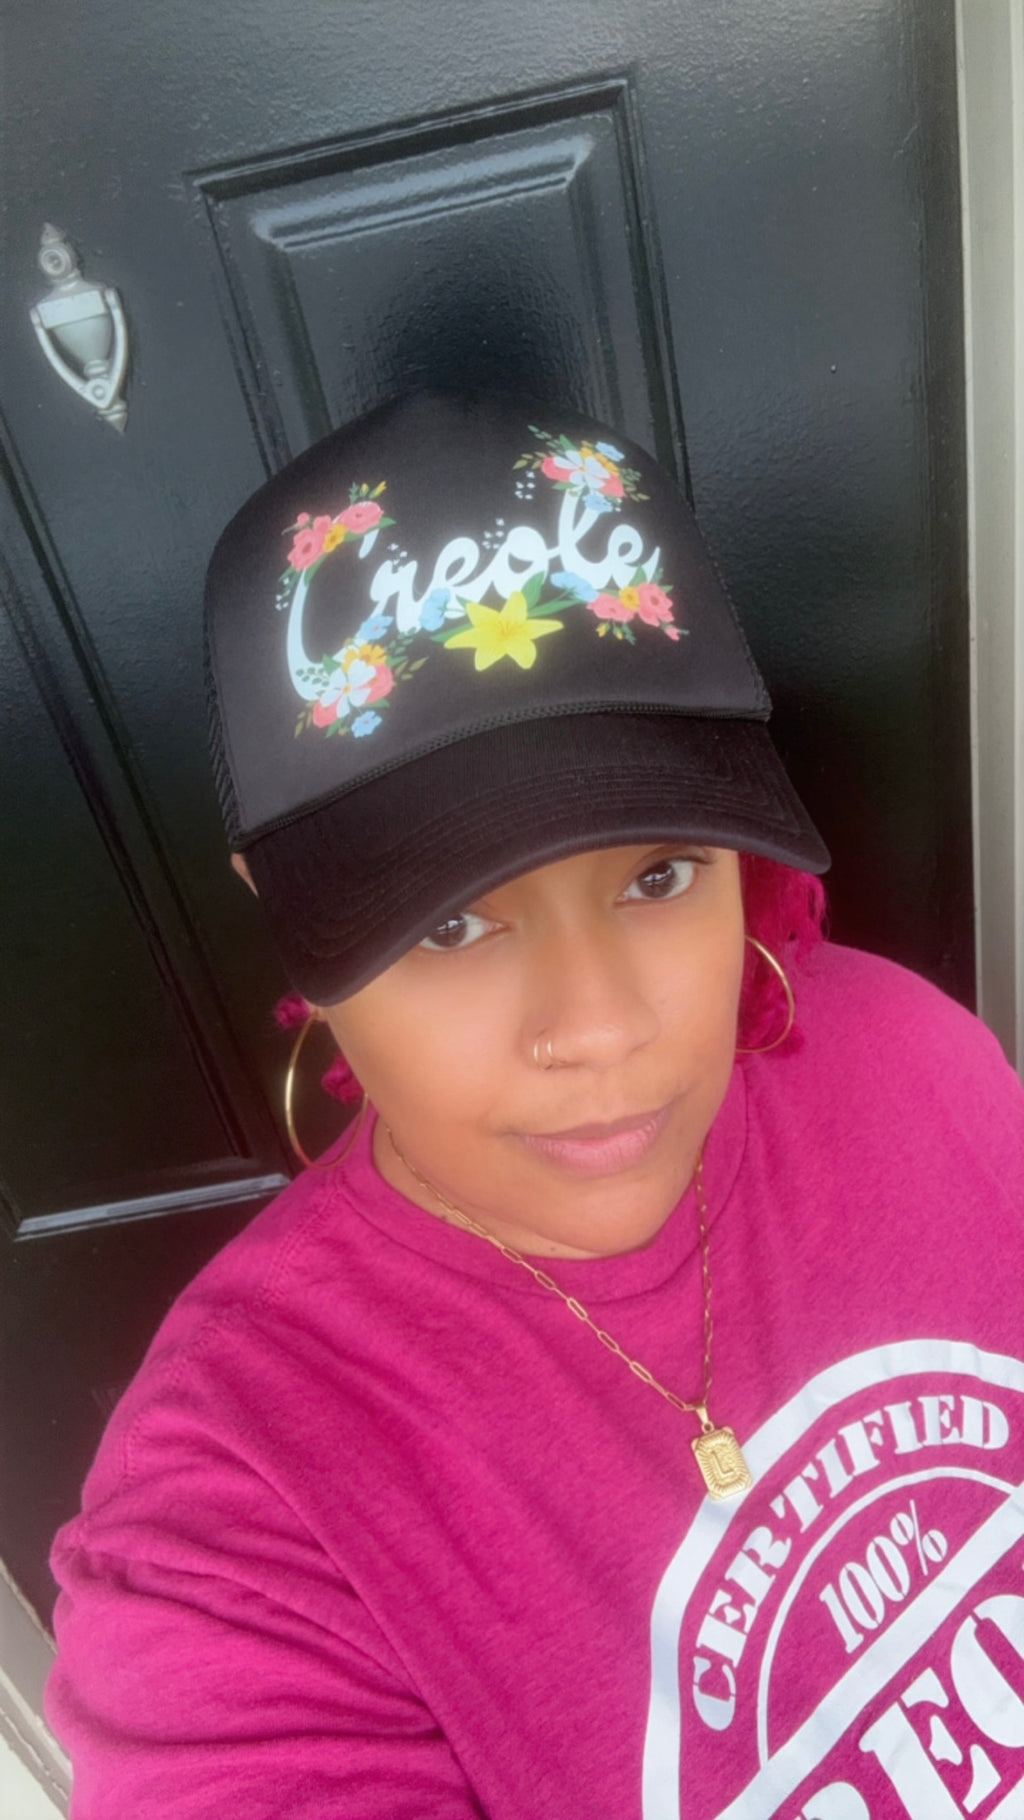 Creole Floral Trucker Hat